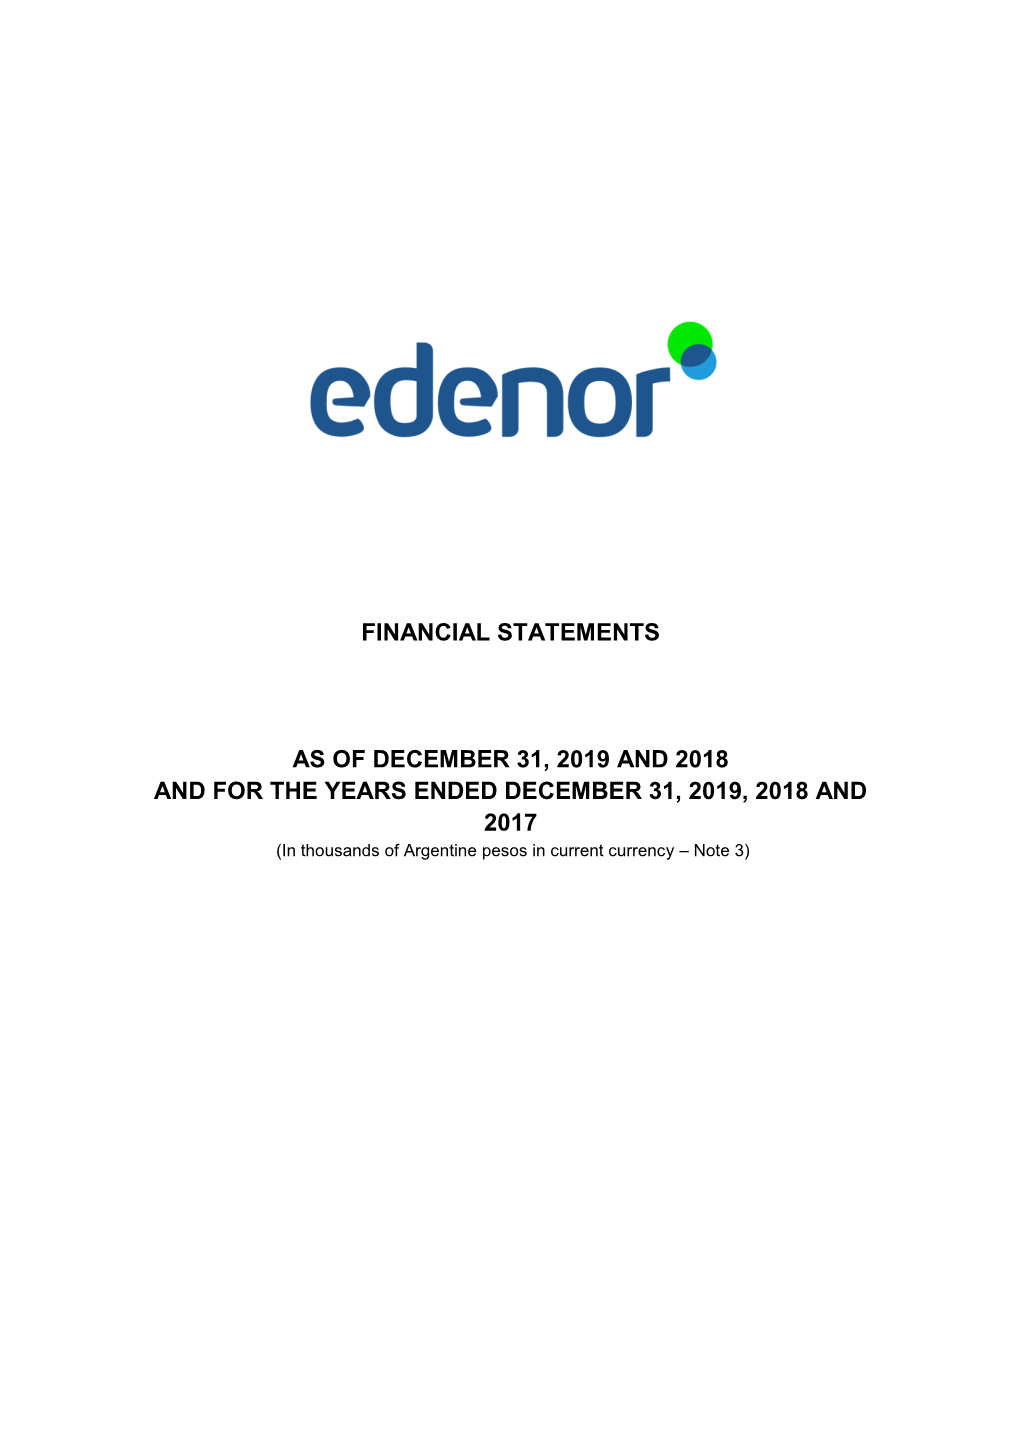 Financial Statements As of December 31, 2019 and 2018